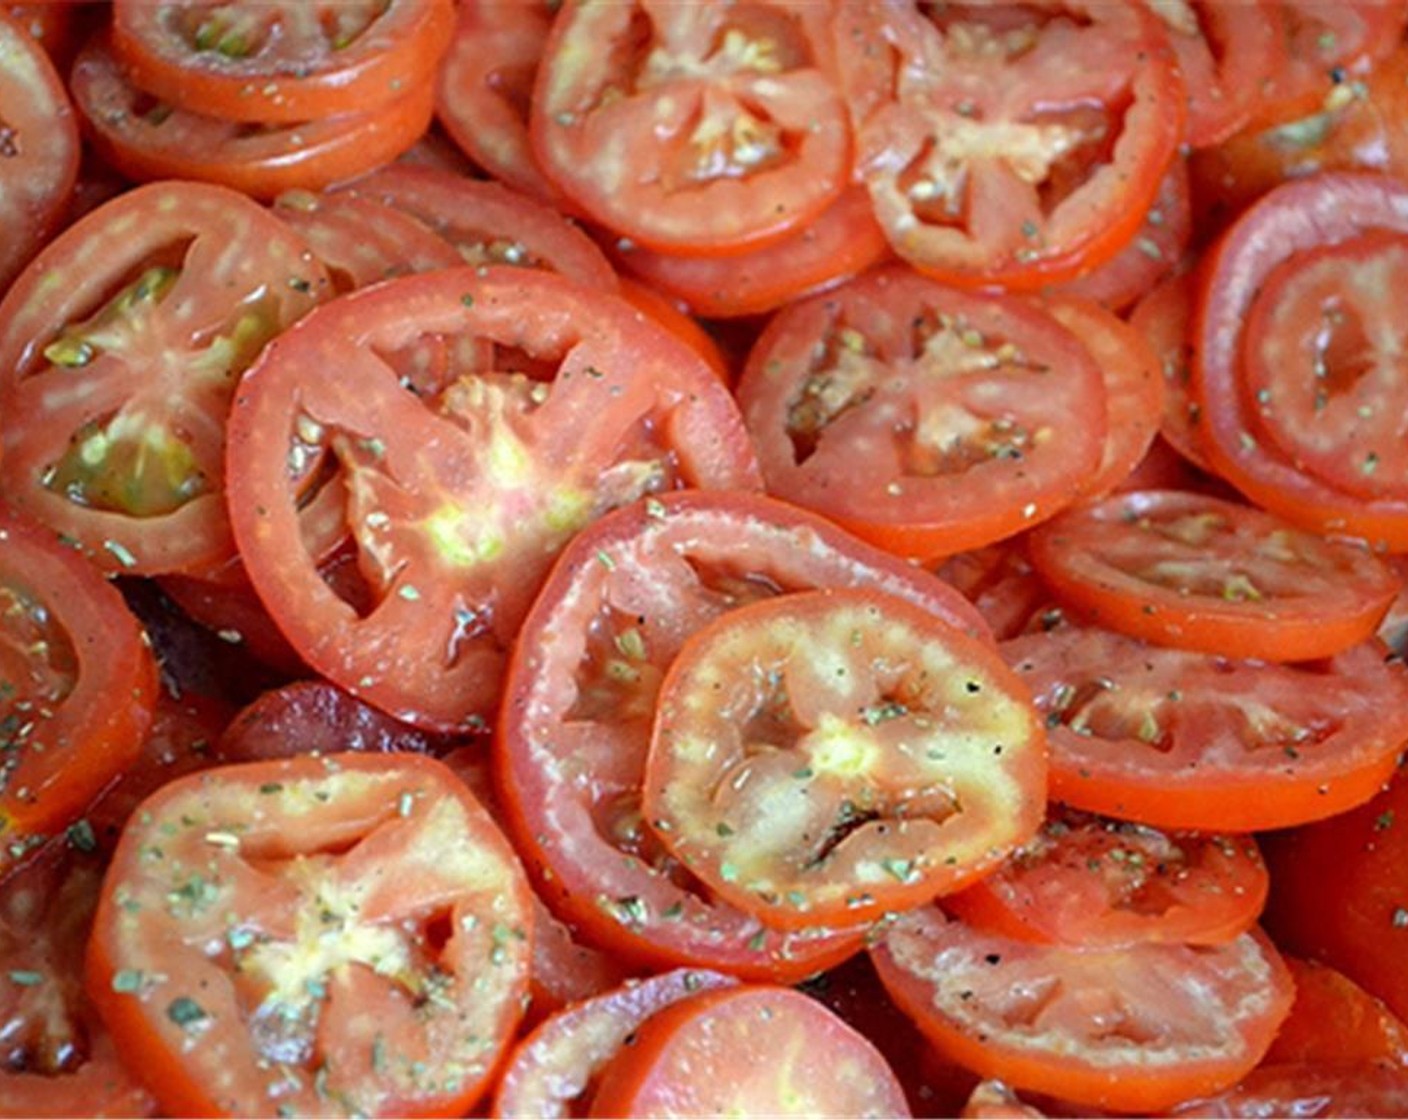 step 3 Put sliced tomatoes on a baking sheet. Add Salt (to taste), Ground Black Pepper (to taste), Granulated Sugar (1/2 Tbsp), Olive Oil (1 Tbsp), Dried Oregano (1 tsp). Toss it together till all tomato slices are evenly coated with oil.